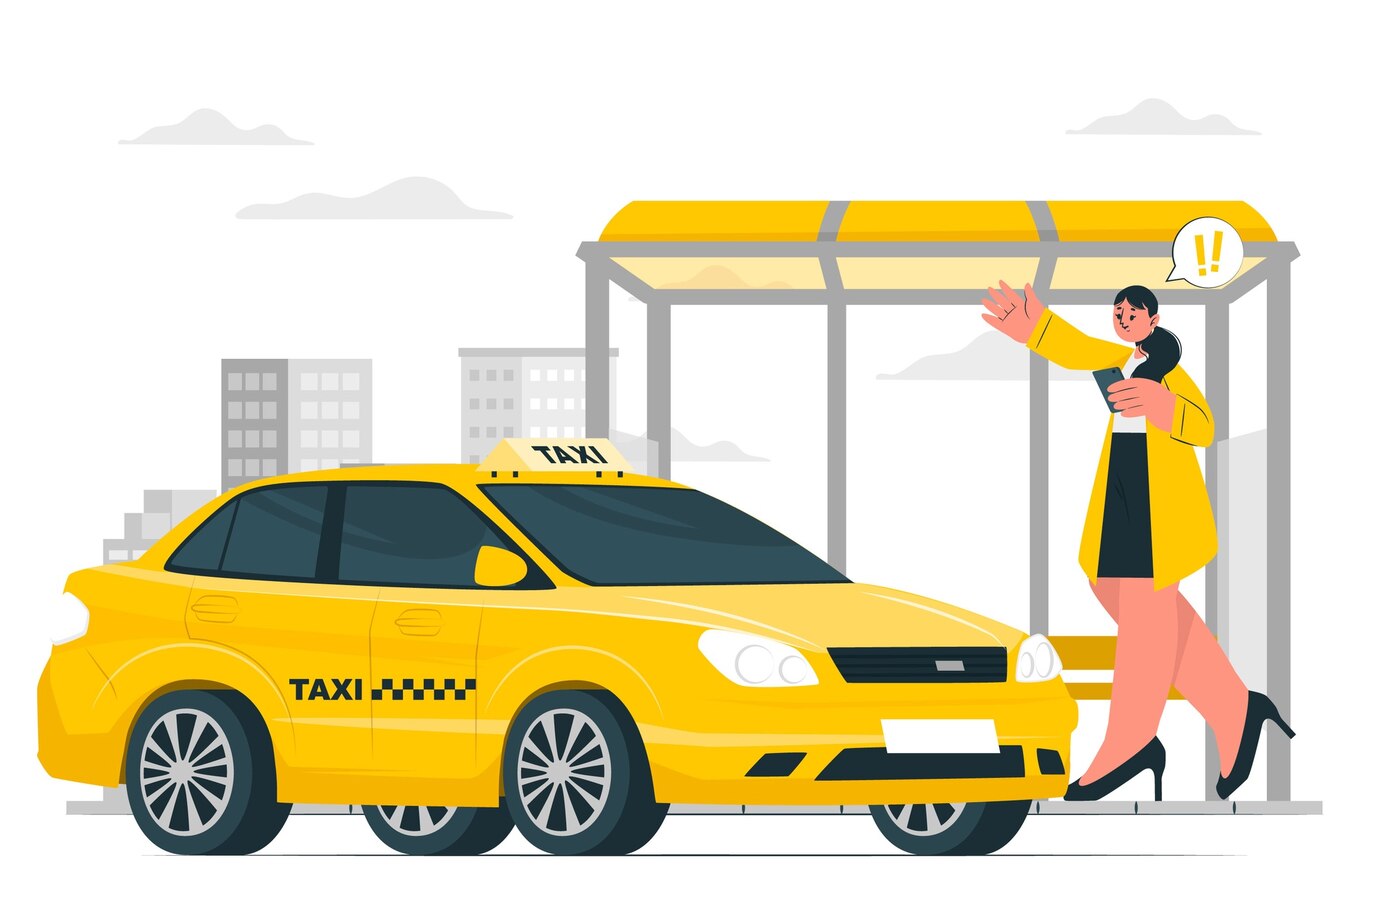 calling-taxi-concept-illustration_114360-19657